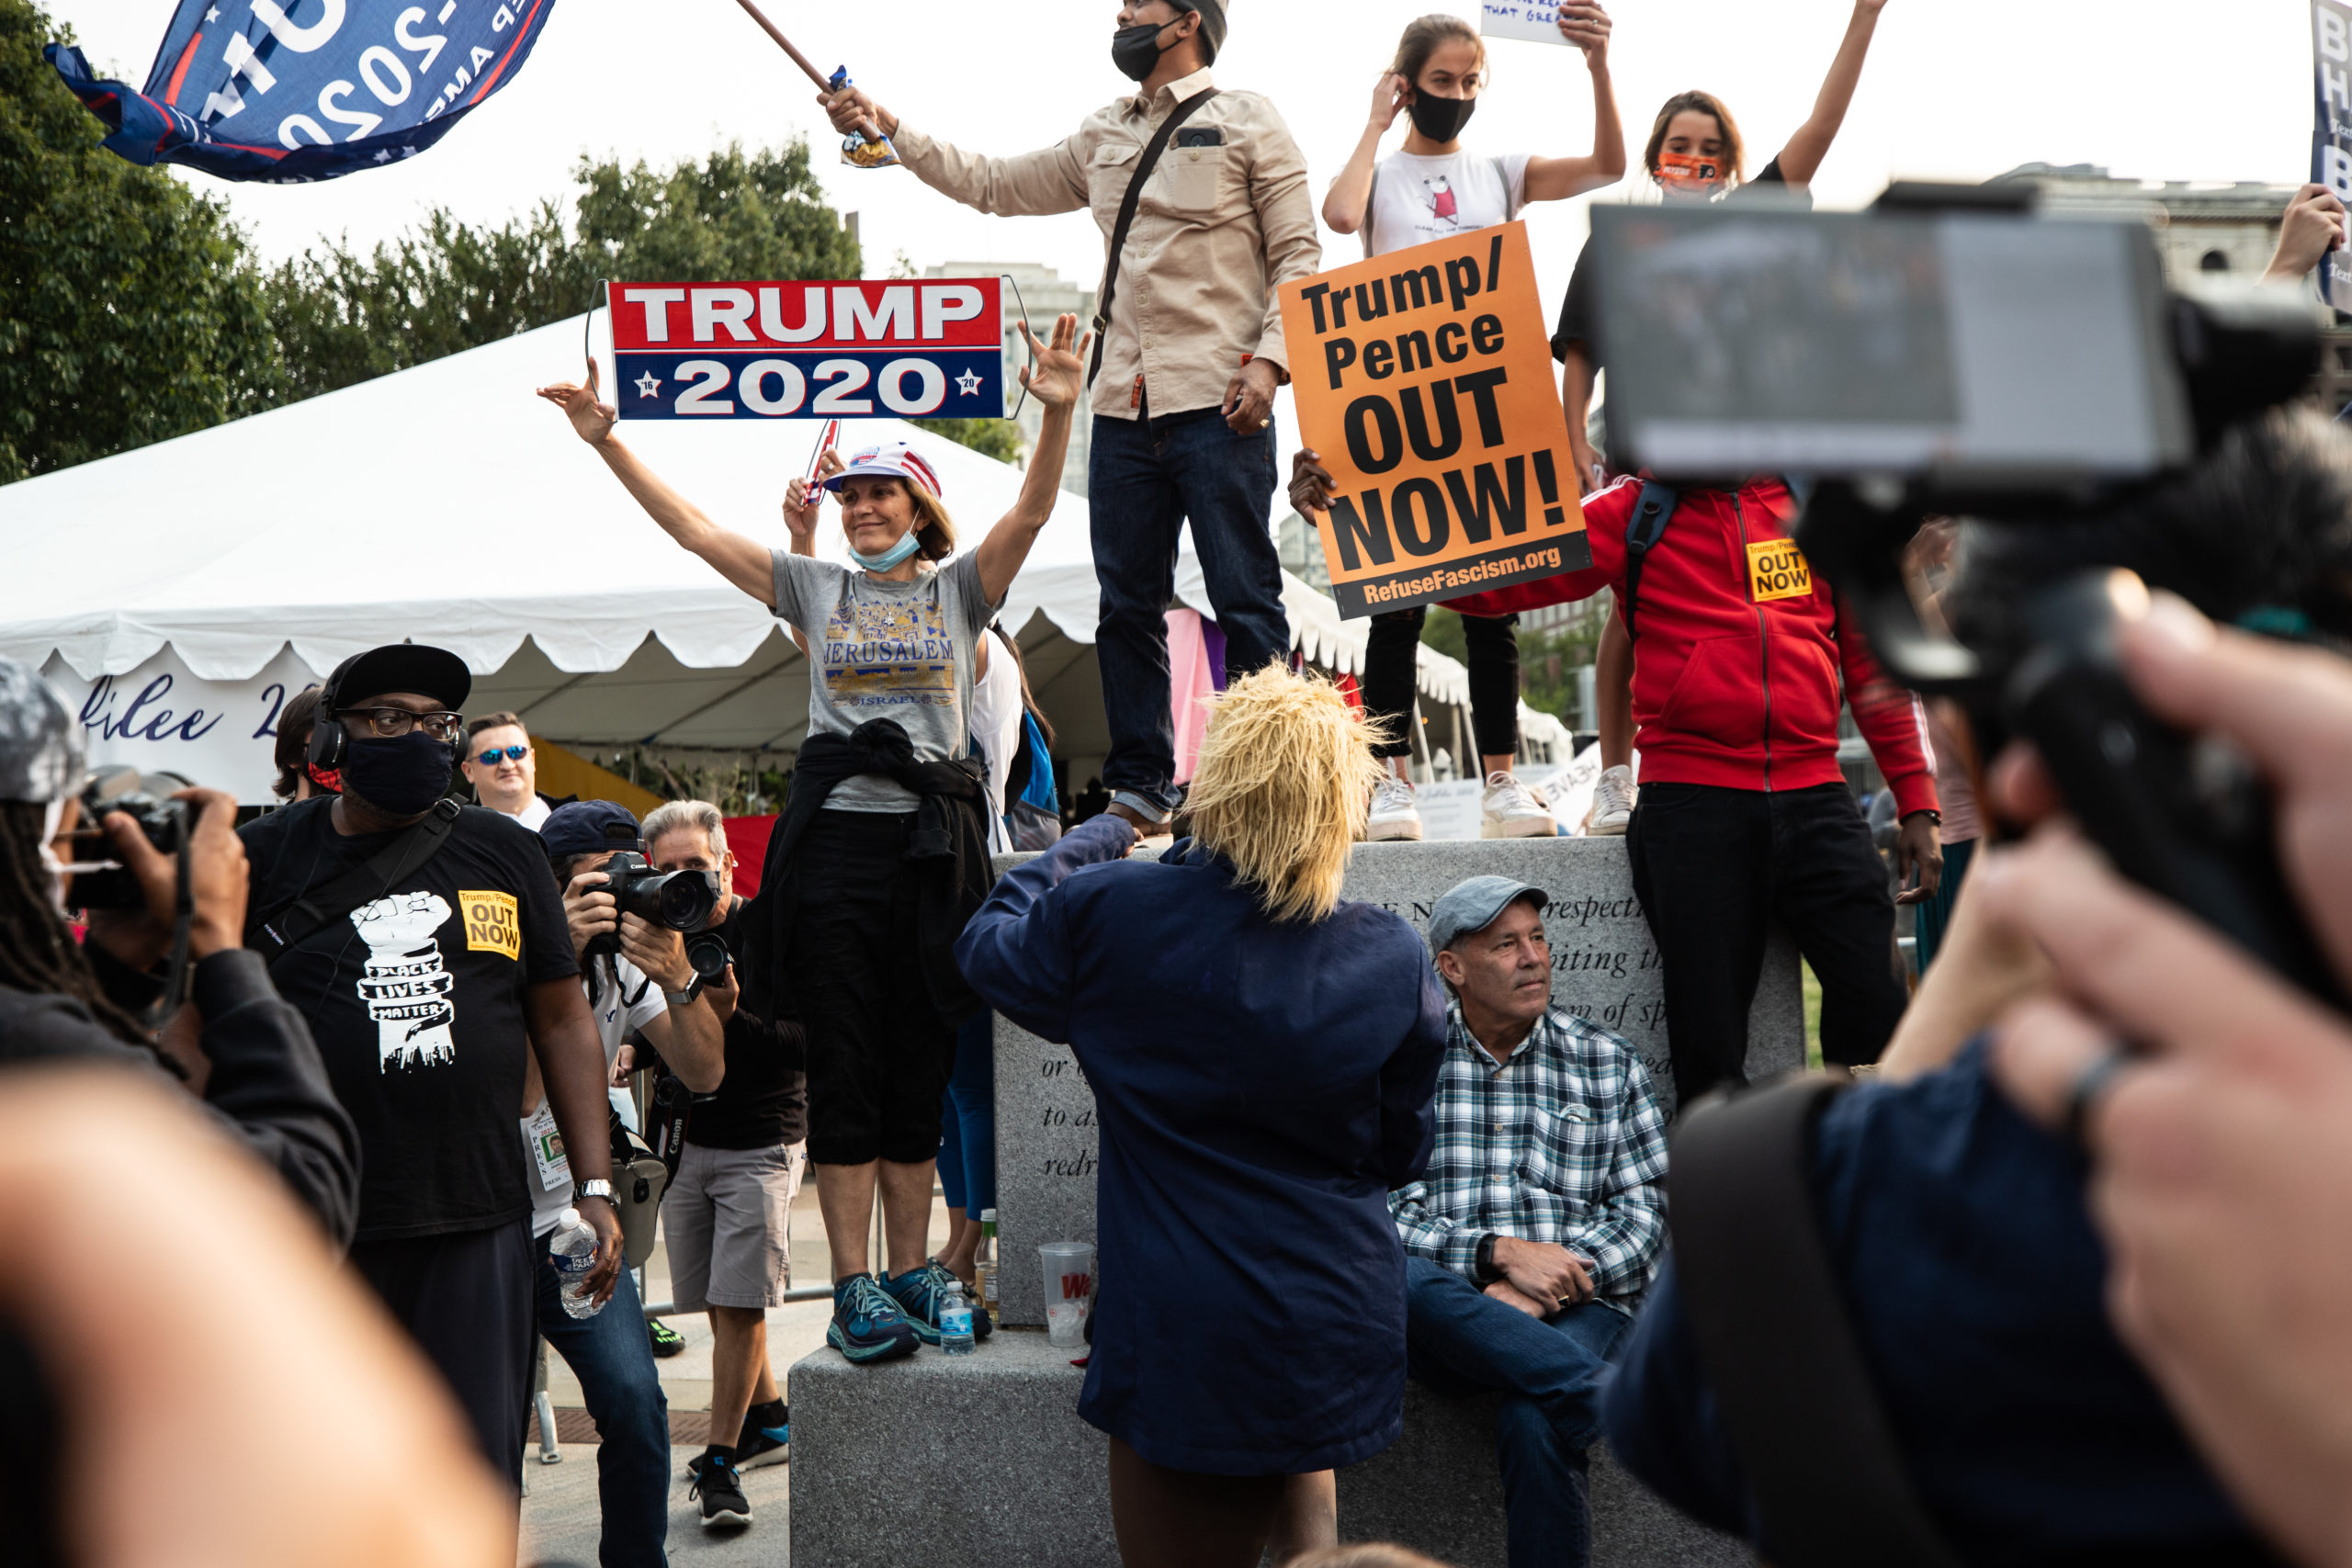 A woman holds a Trump 2020 sign in Philadelphia, Pennsylvania on Sept. 15, 2020. (Photo: Kaylee Greenlee / DCNF)